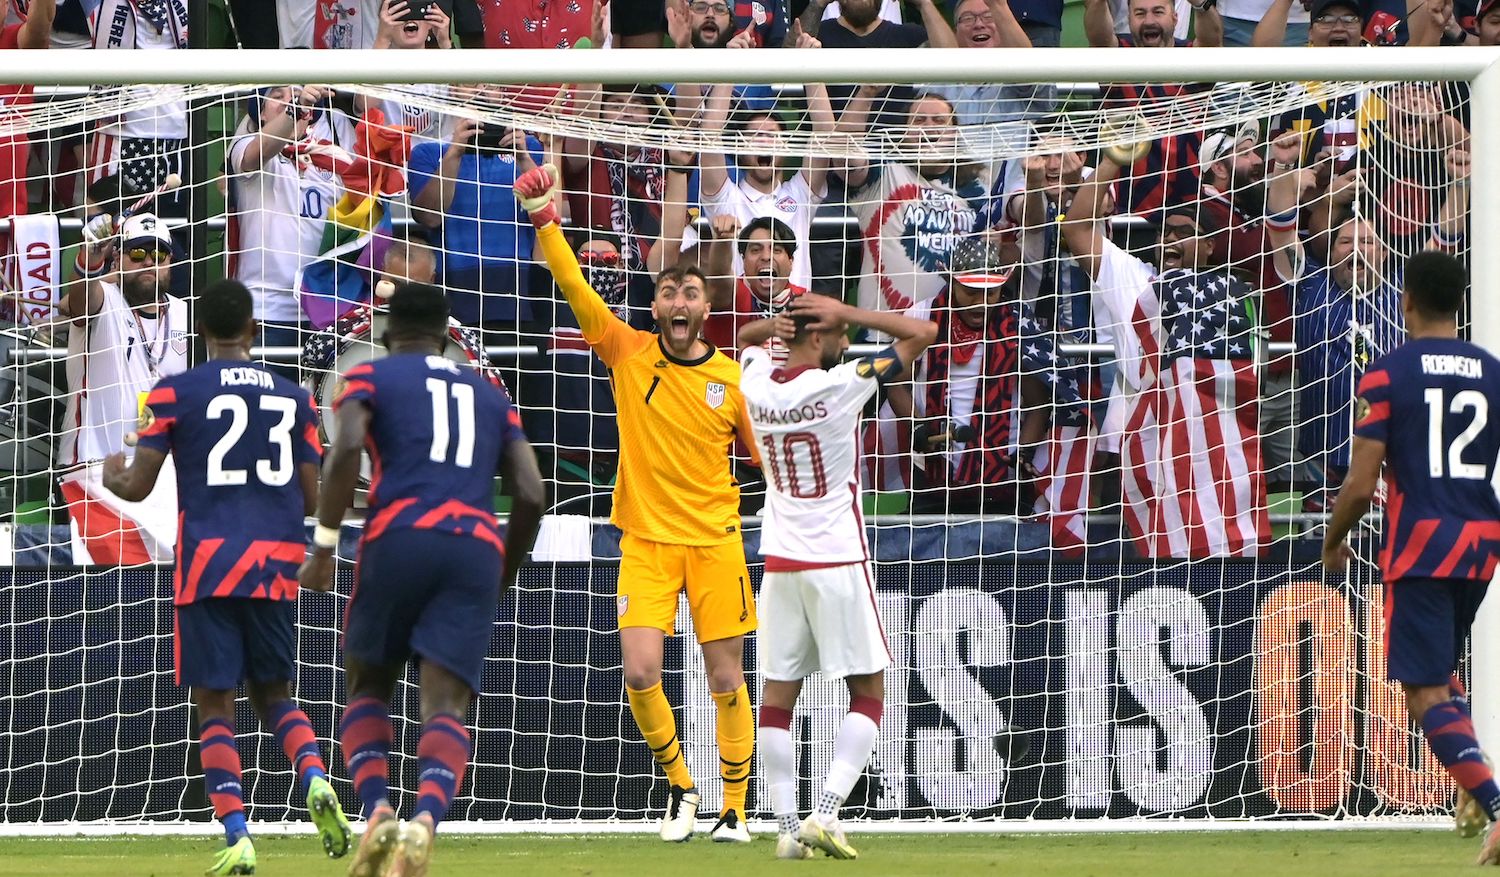 USA's goalkeeper Matt Turner (C) celebrates after Qatar's forward Hasan Al Haydos (2nd R) missed a penalty kick during the Concacaf Gold Cup semifinal football match between Qatar and USA at Q2 stadium in Austin, Texas on July 29, 2021. (Photo by Sergio FLORES / AFP) (Photo by SERGIO FLORES/AFP via Getty Images)